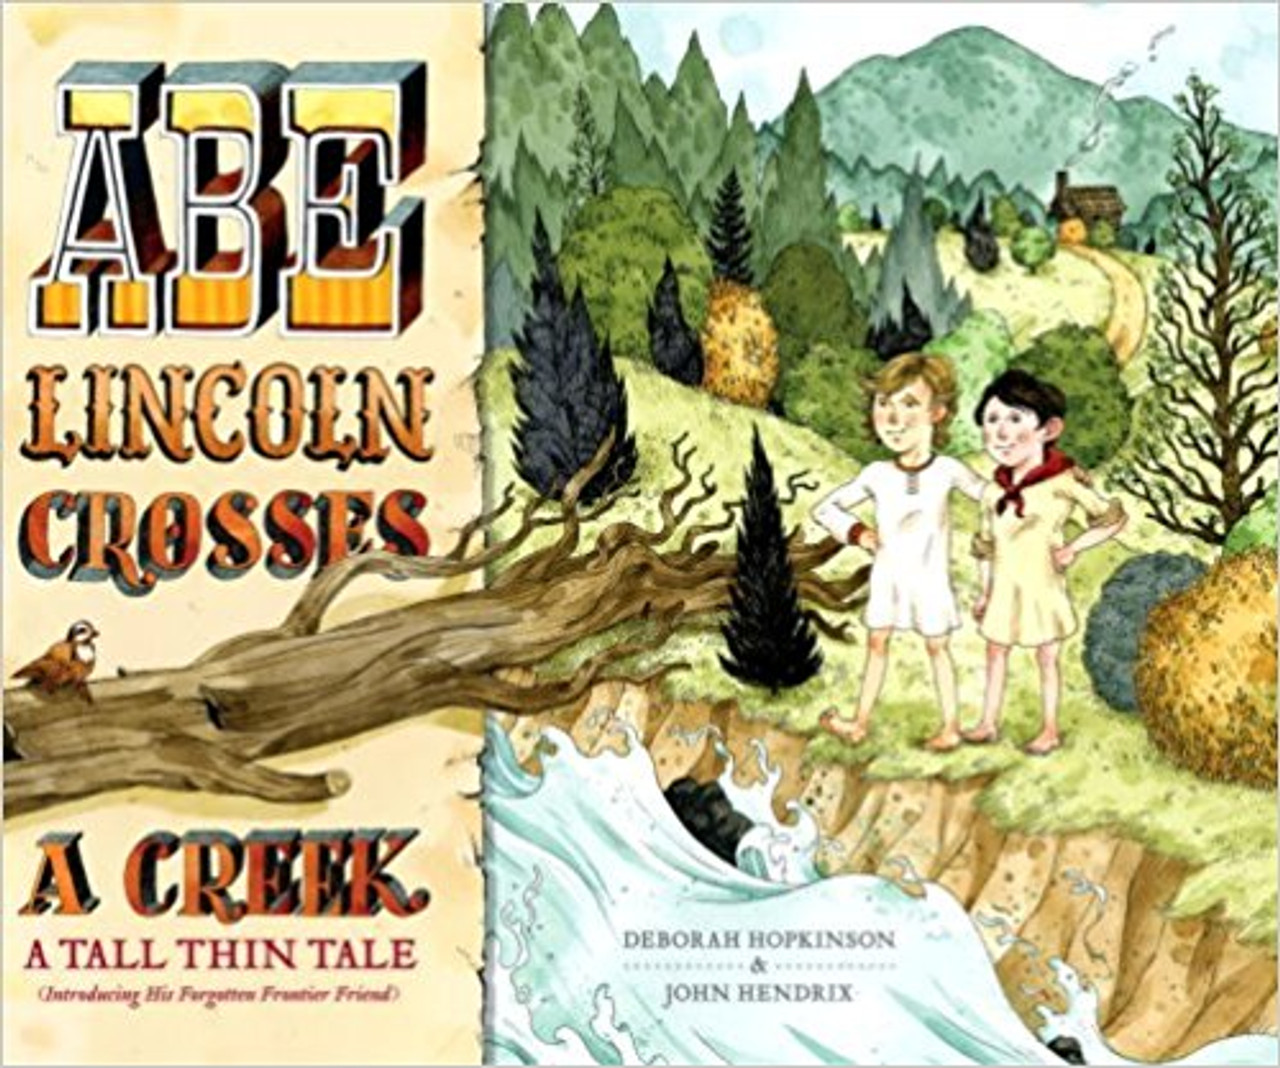 Abe Lincoln Crosses a Creek: A Tall, Thin Tale (Introducing His Forgotten Frontier Friend) by Deborah Hopkinson